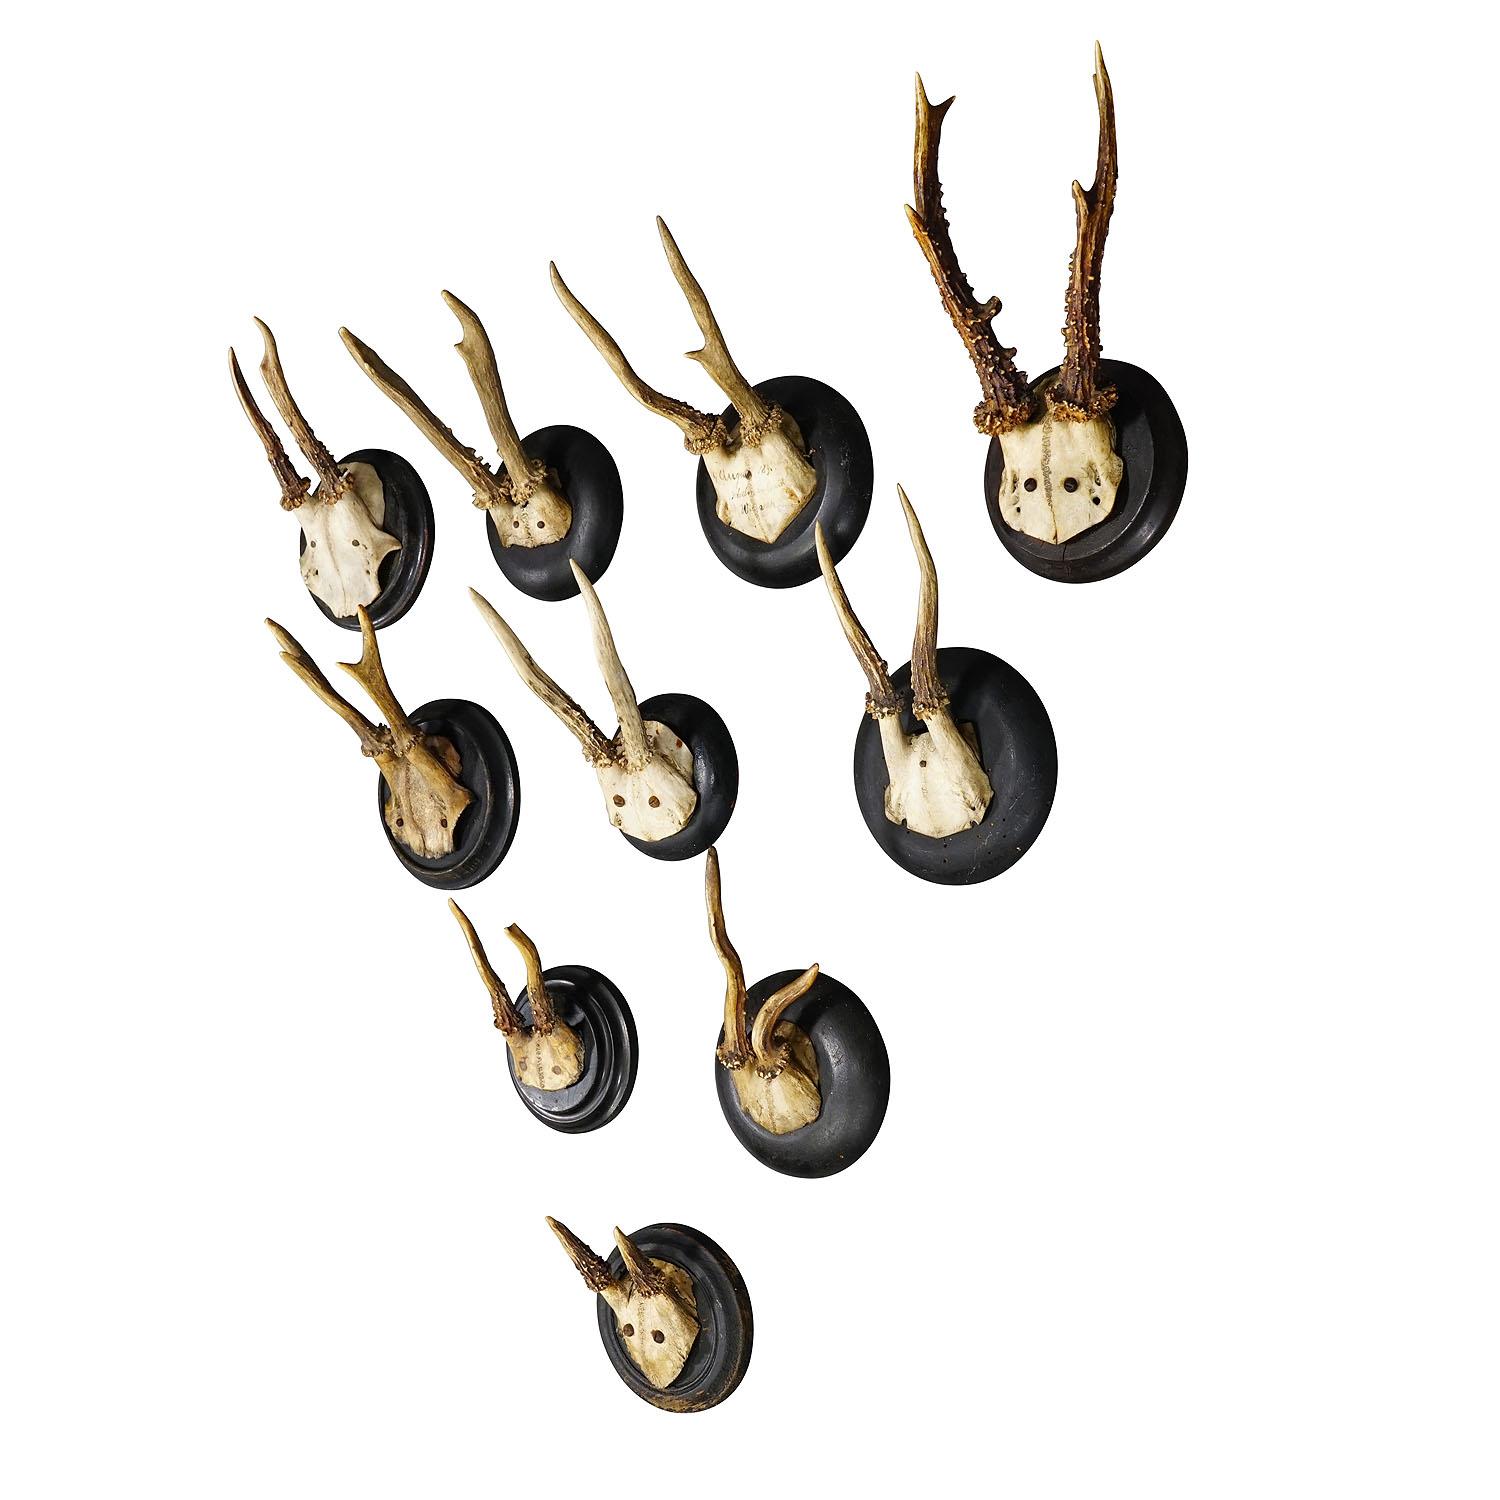 Set of Ten Roe Deer Trophies on Turned Plaques Germany ca. 1900s

A set of ten antique Black Forest roe deer (Capreolus capreolus) trophies mounted on turned wooden plaques. The trophies were shot in Germany around 1900.  A great addition to every